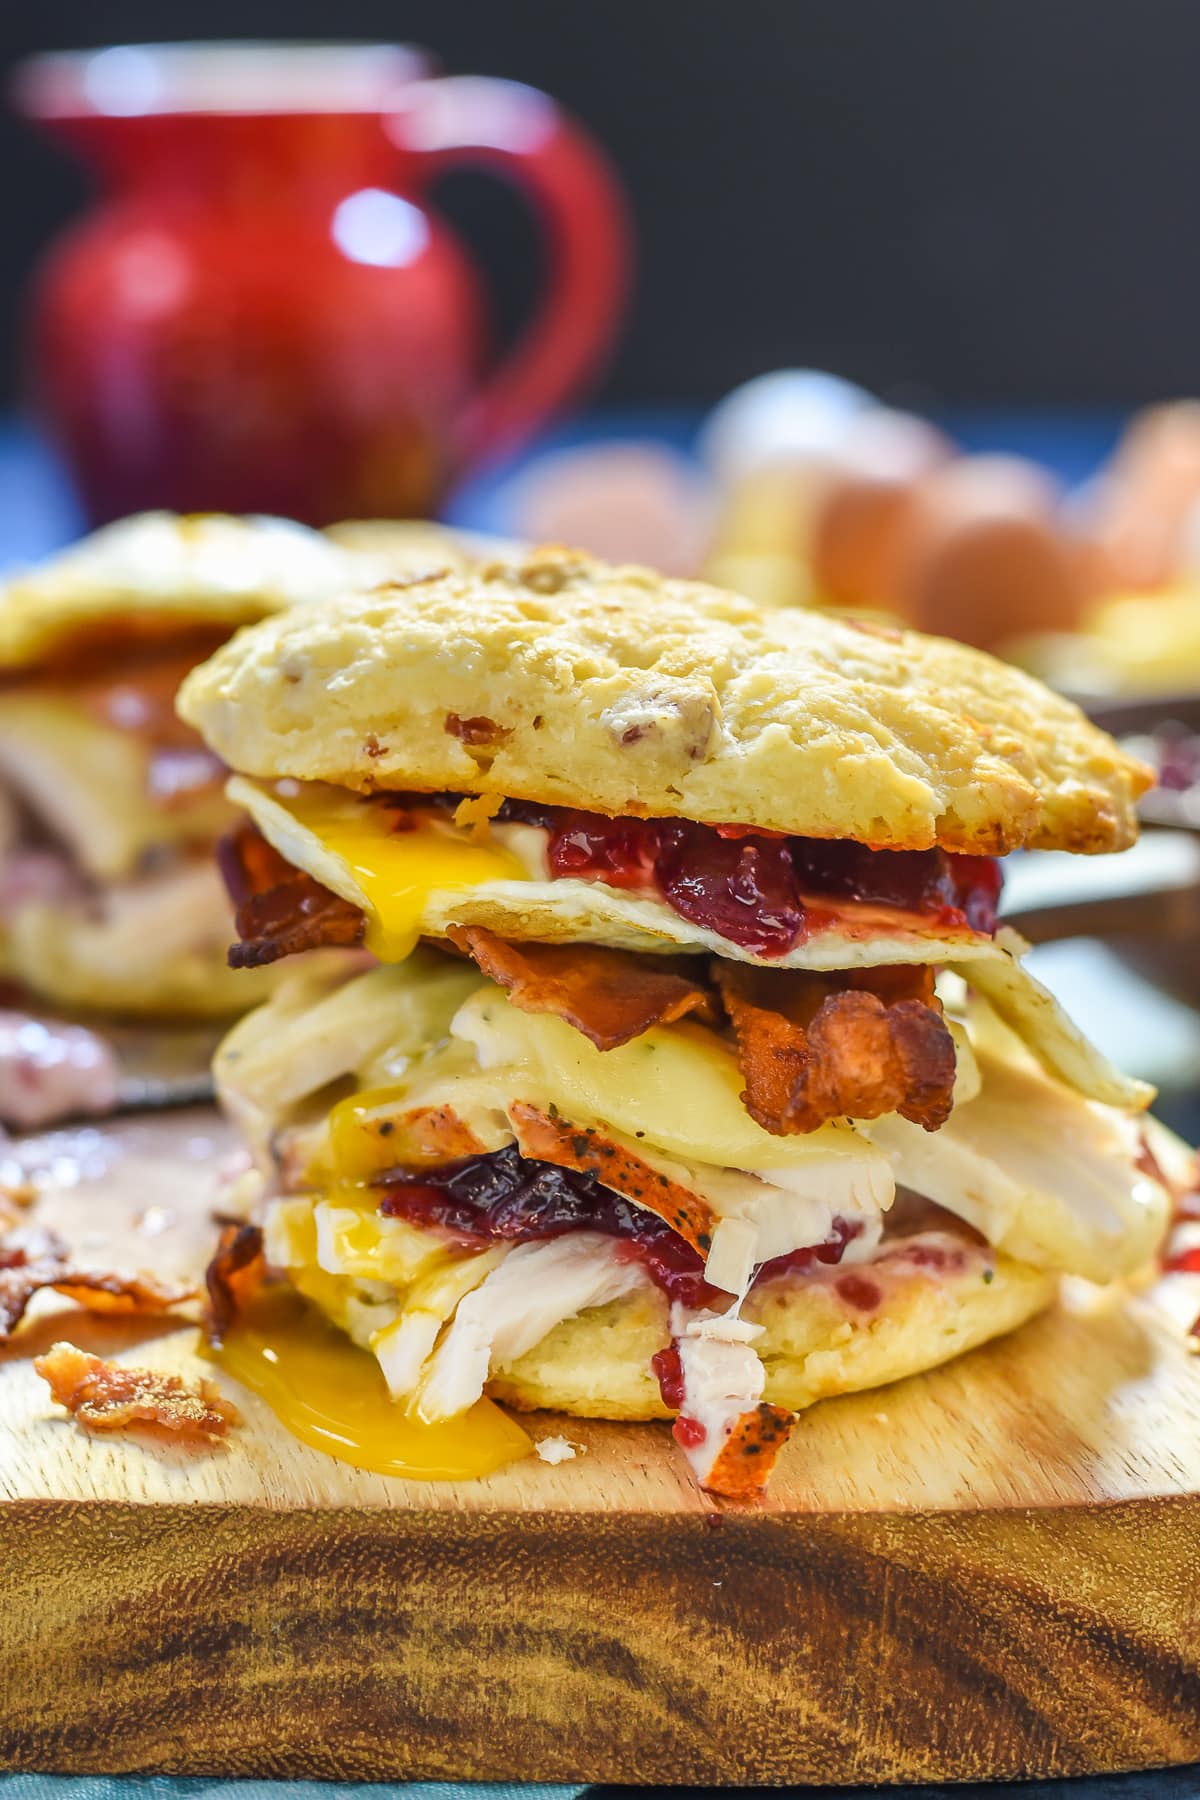 Got Thanksgiving leftovers? Use them up in this epic Turkey Egg and Bacon Breakfast Sandwich with Cranberry Mayo.